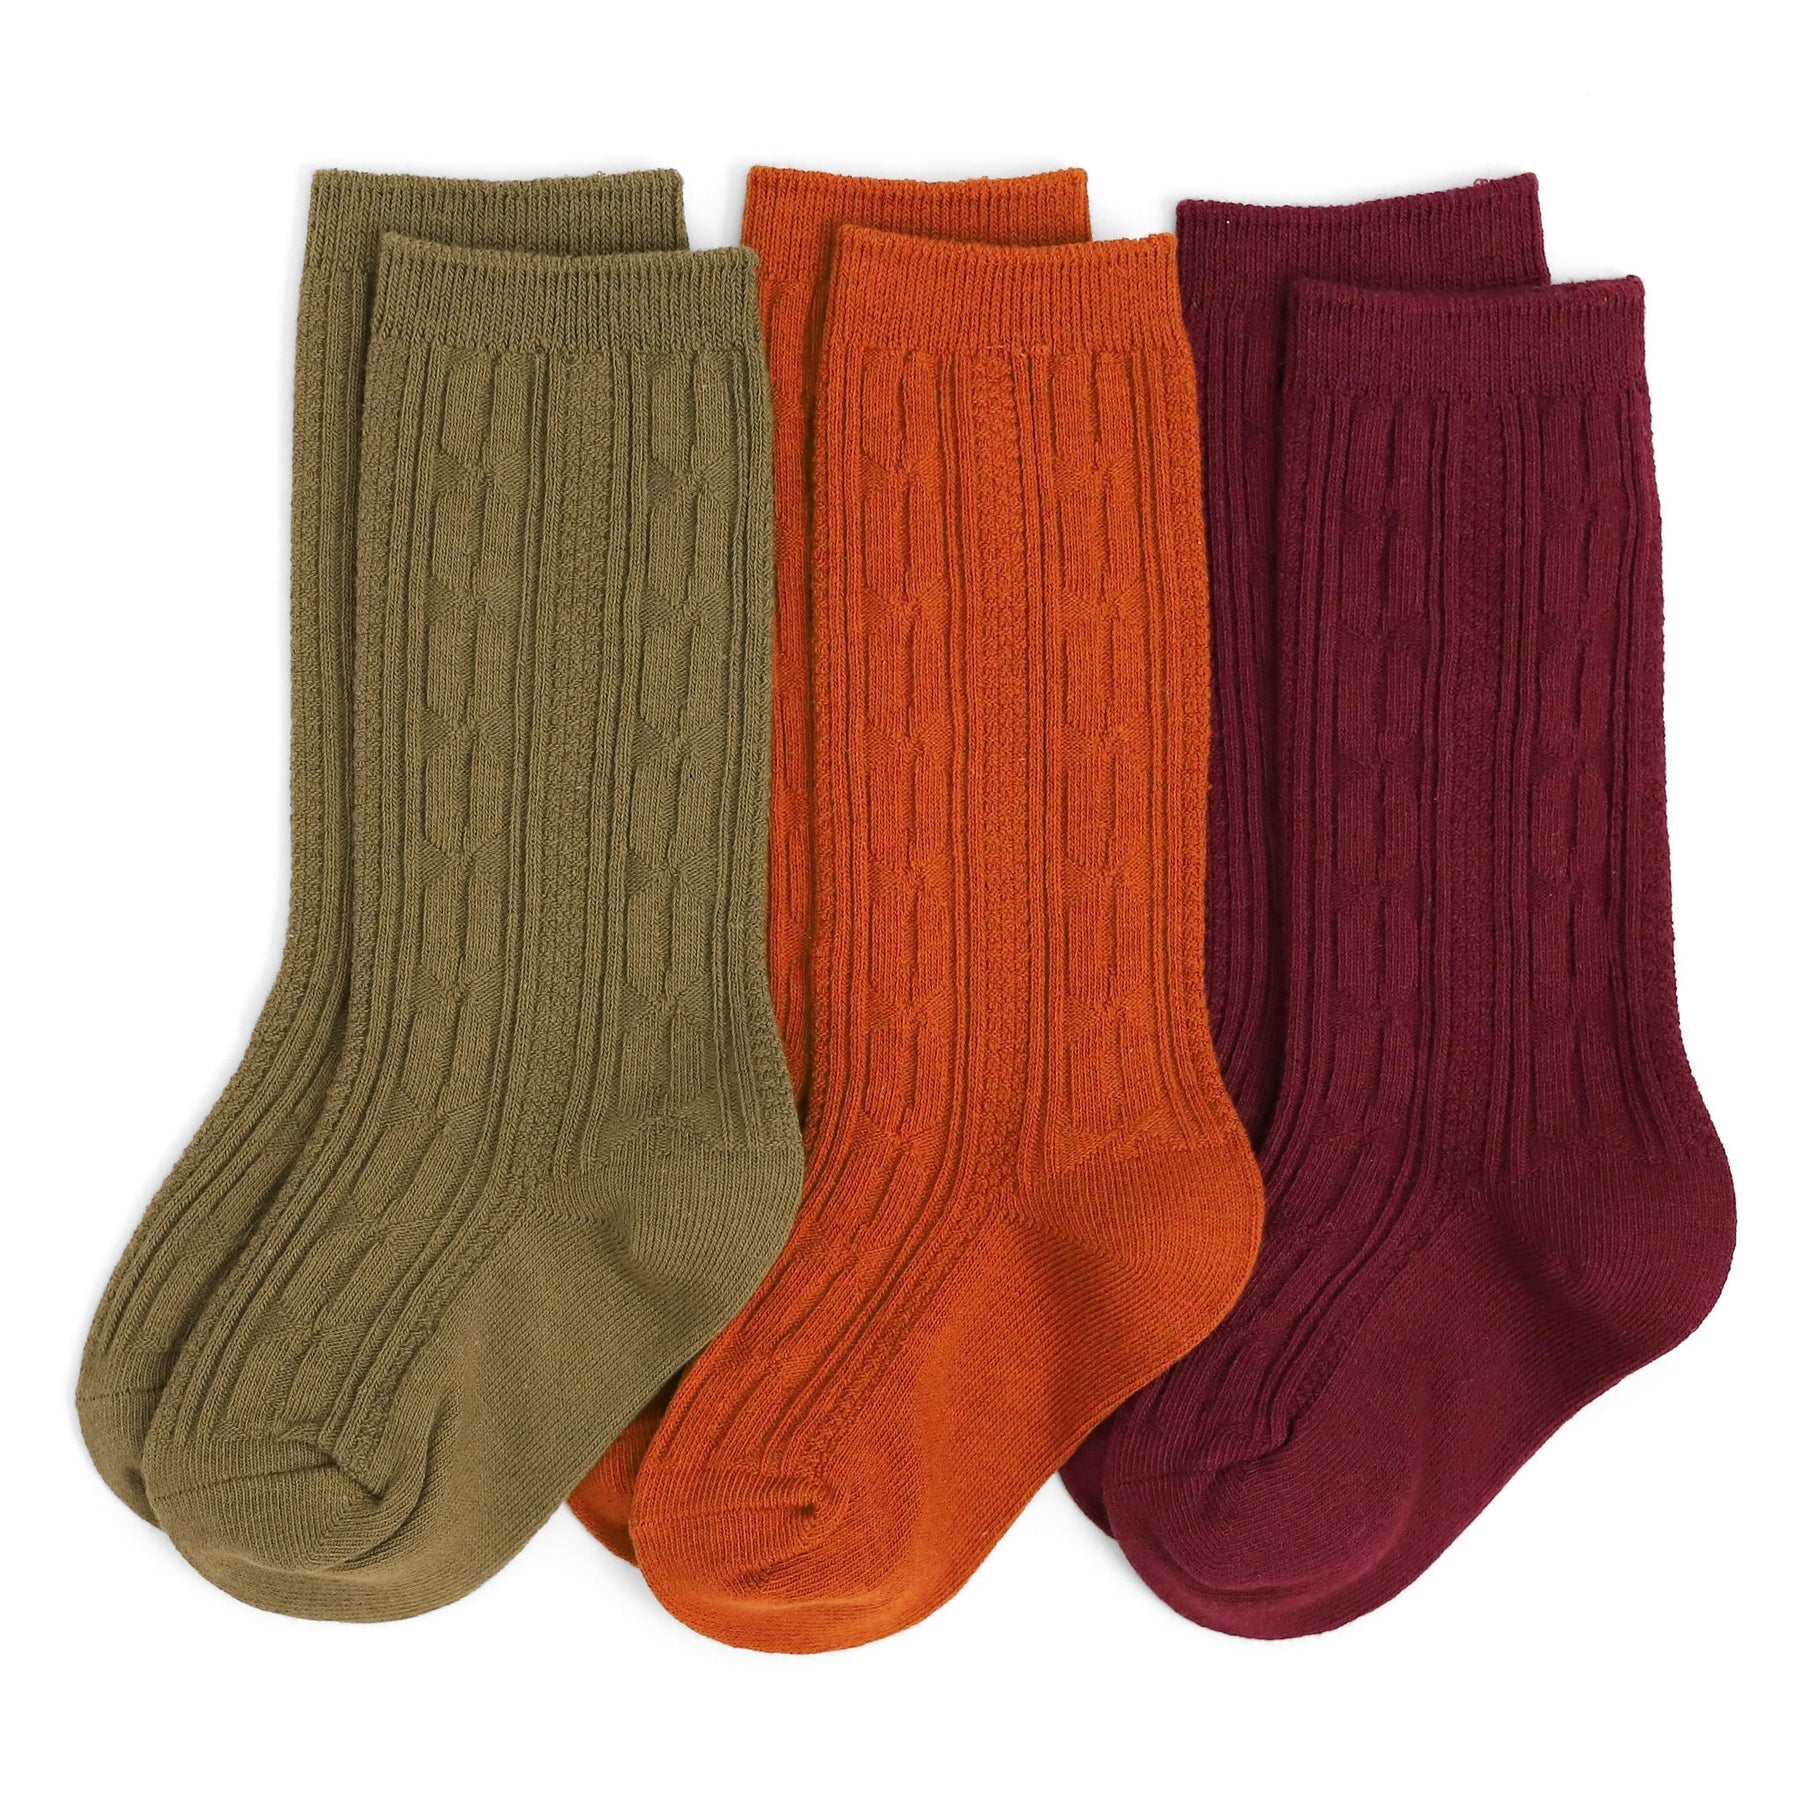 Little Stocking Co. Yosemite Cable Knit Knee Highs